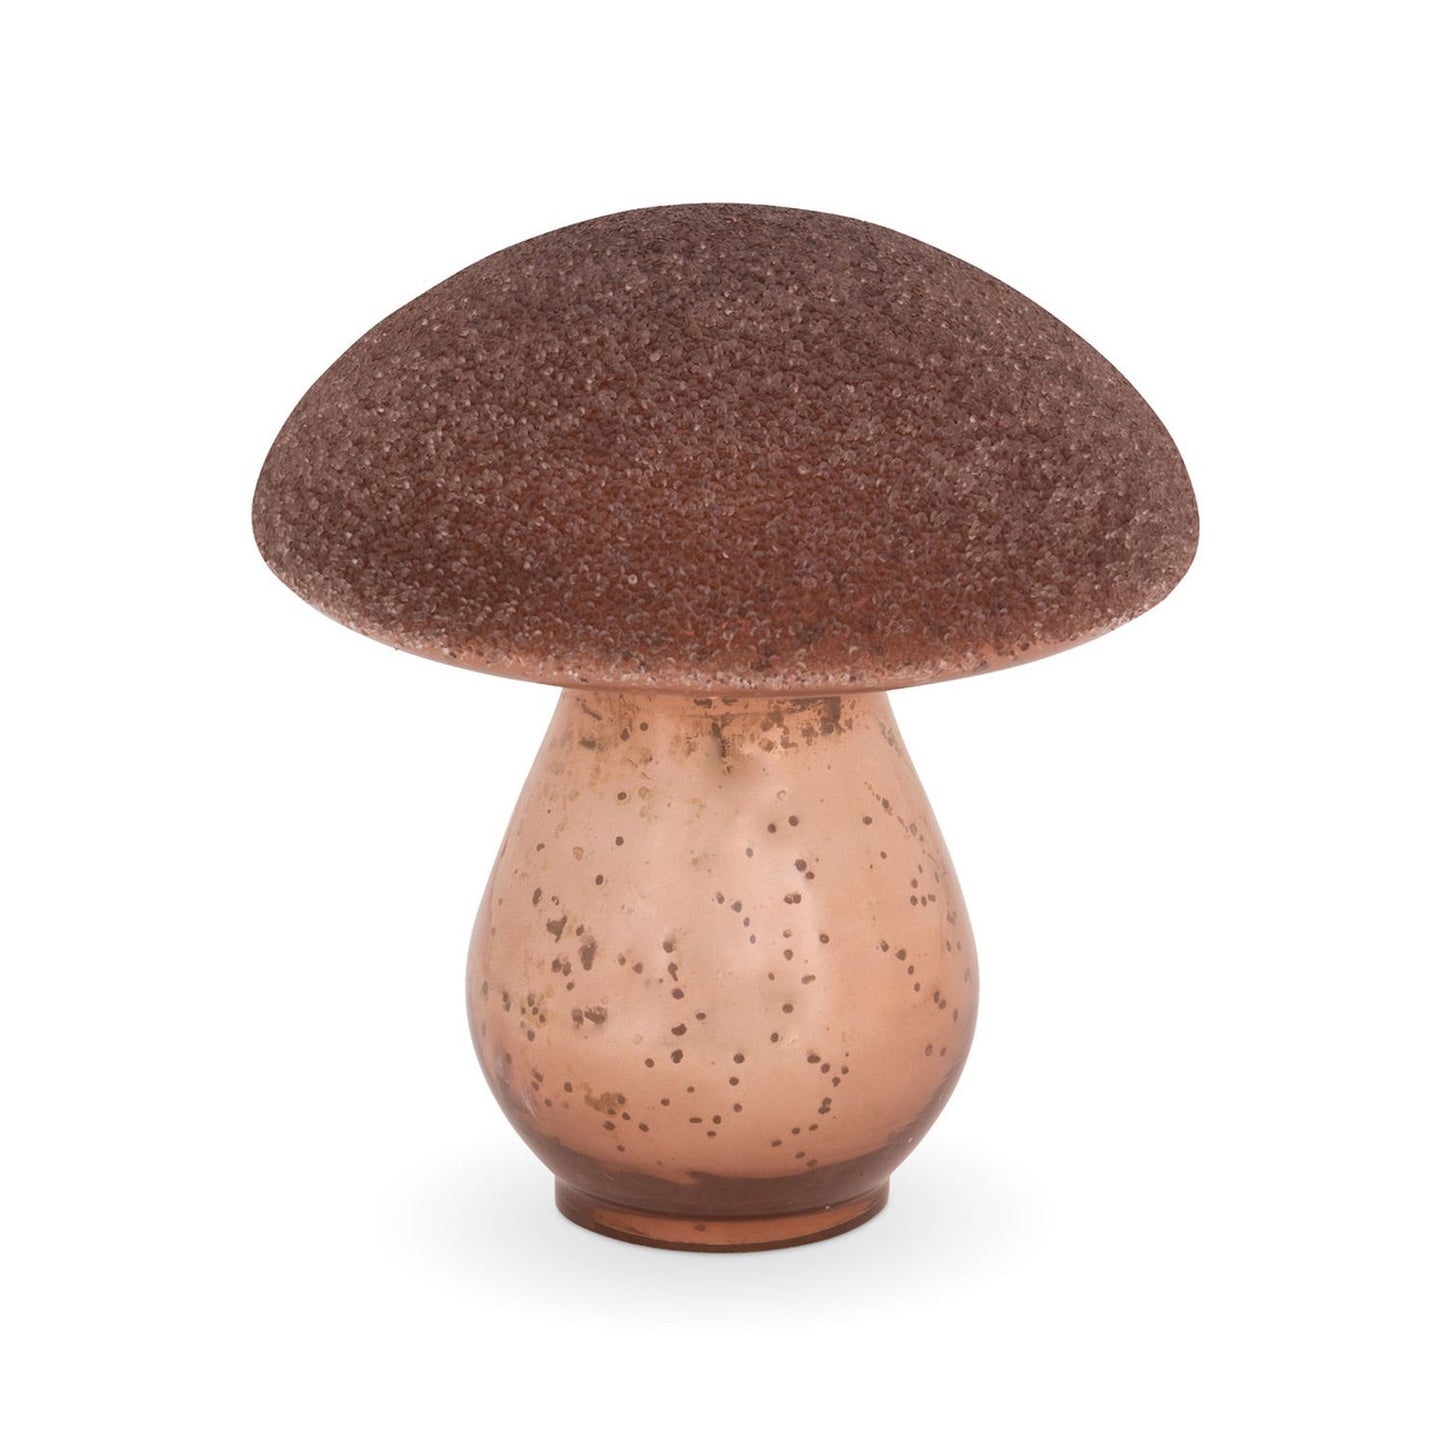 Park Hill Collection Beaded Top Forest Glass Mushroom